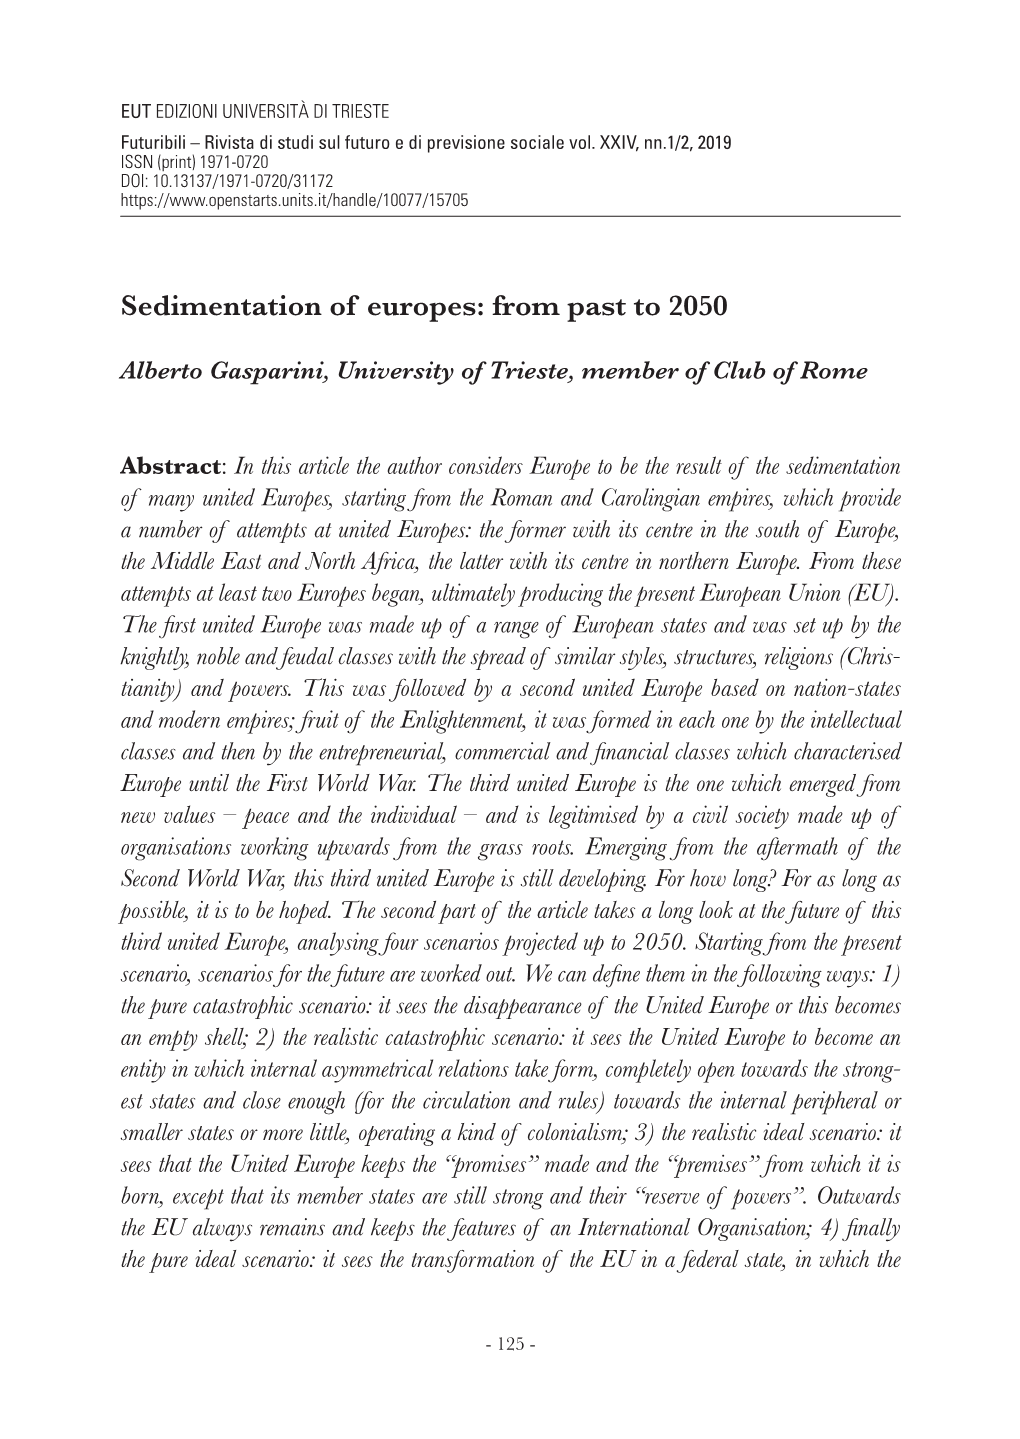 Sedimentation of Europes: from Past to 2050